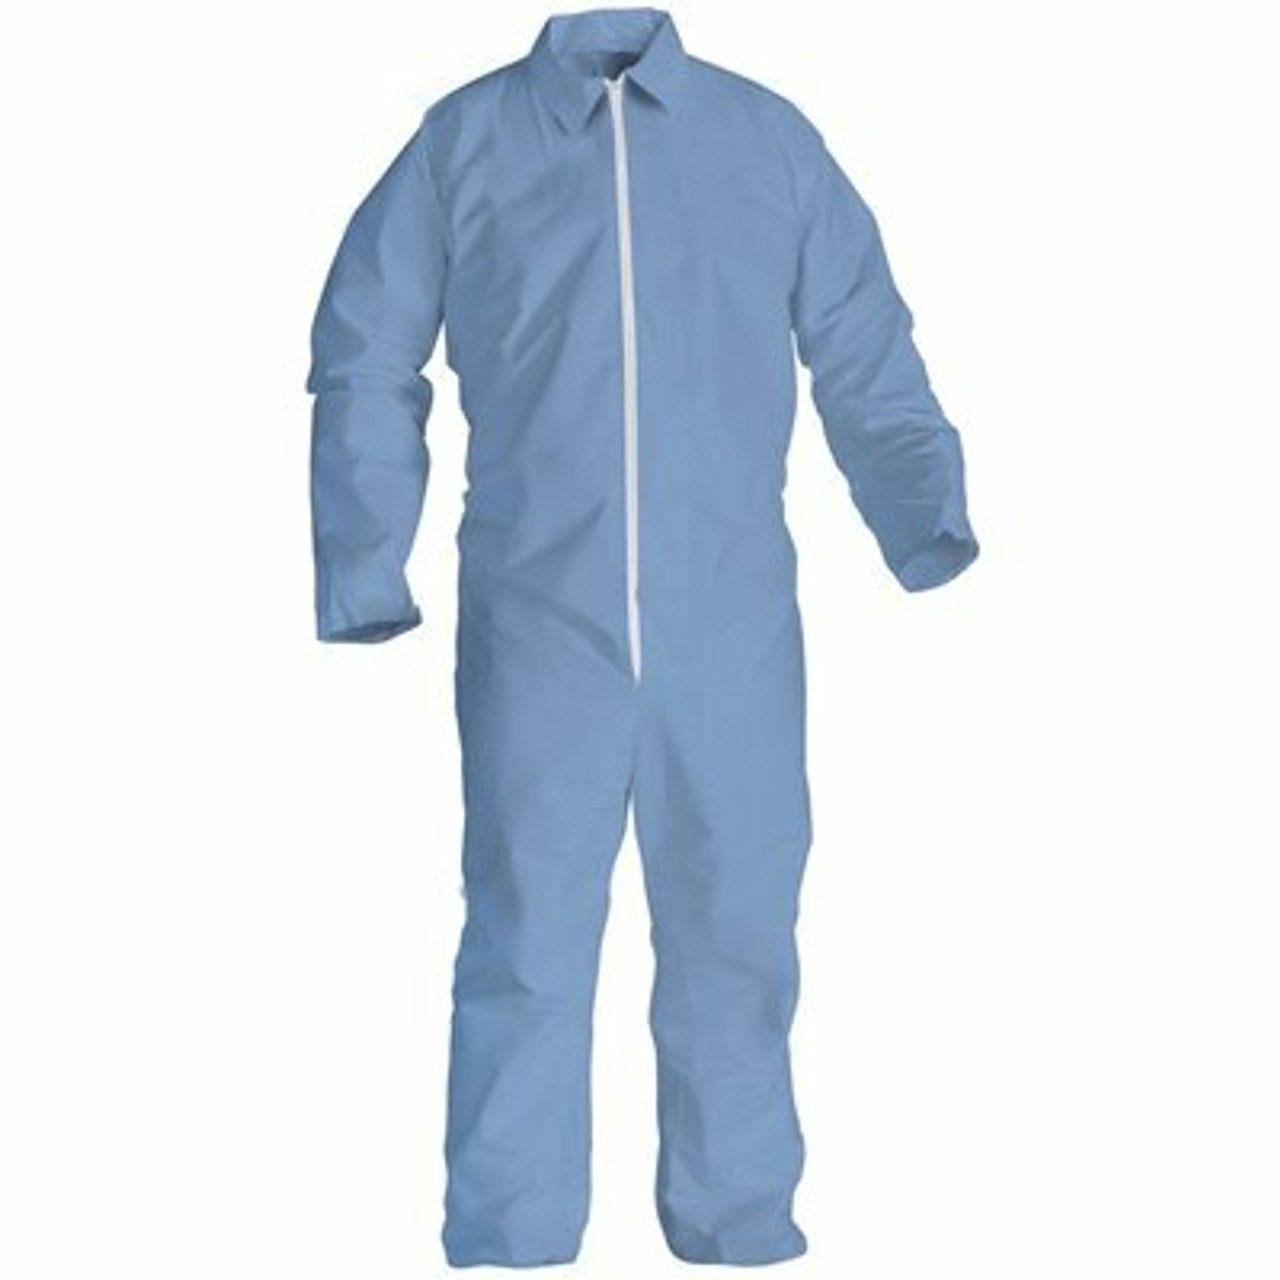 Kleenguard A65 2Xl Flame Resistant Coveralls Zip Front Open Wrists And Ankles Ansi Sizing Anti-Static Blue (25/Case)